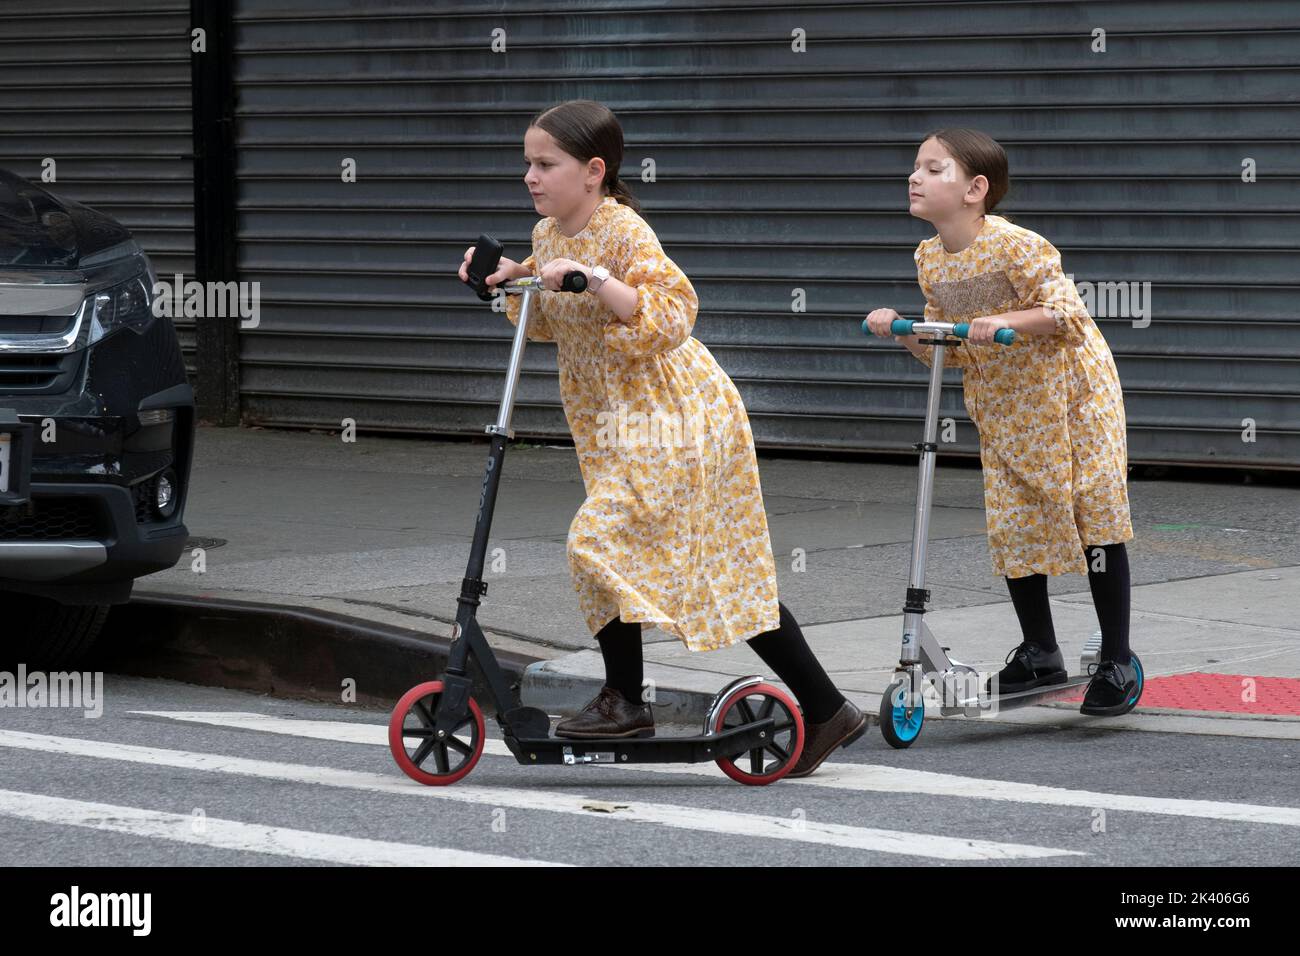 Orthodox Jewish sisters in identical dresses ride their scooters on Lee Avenue in Williamsburg, Brooklyn, New York. Stock Photo